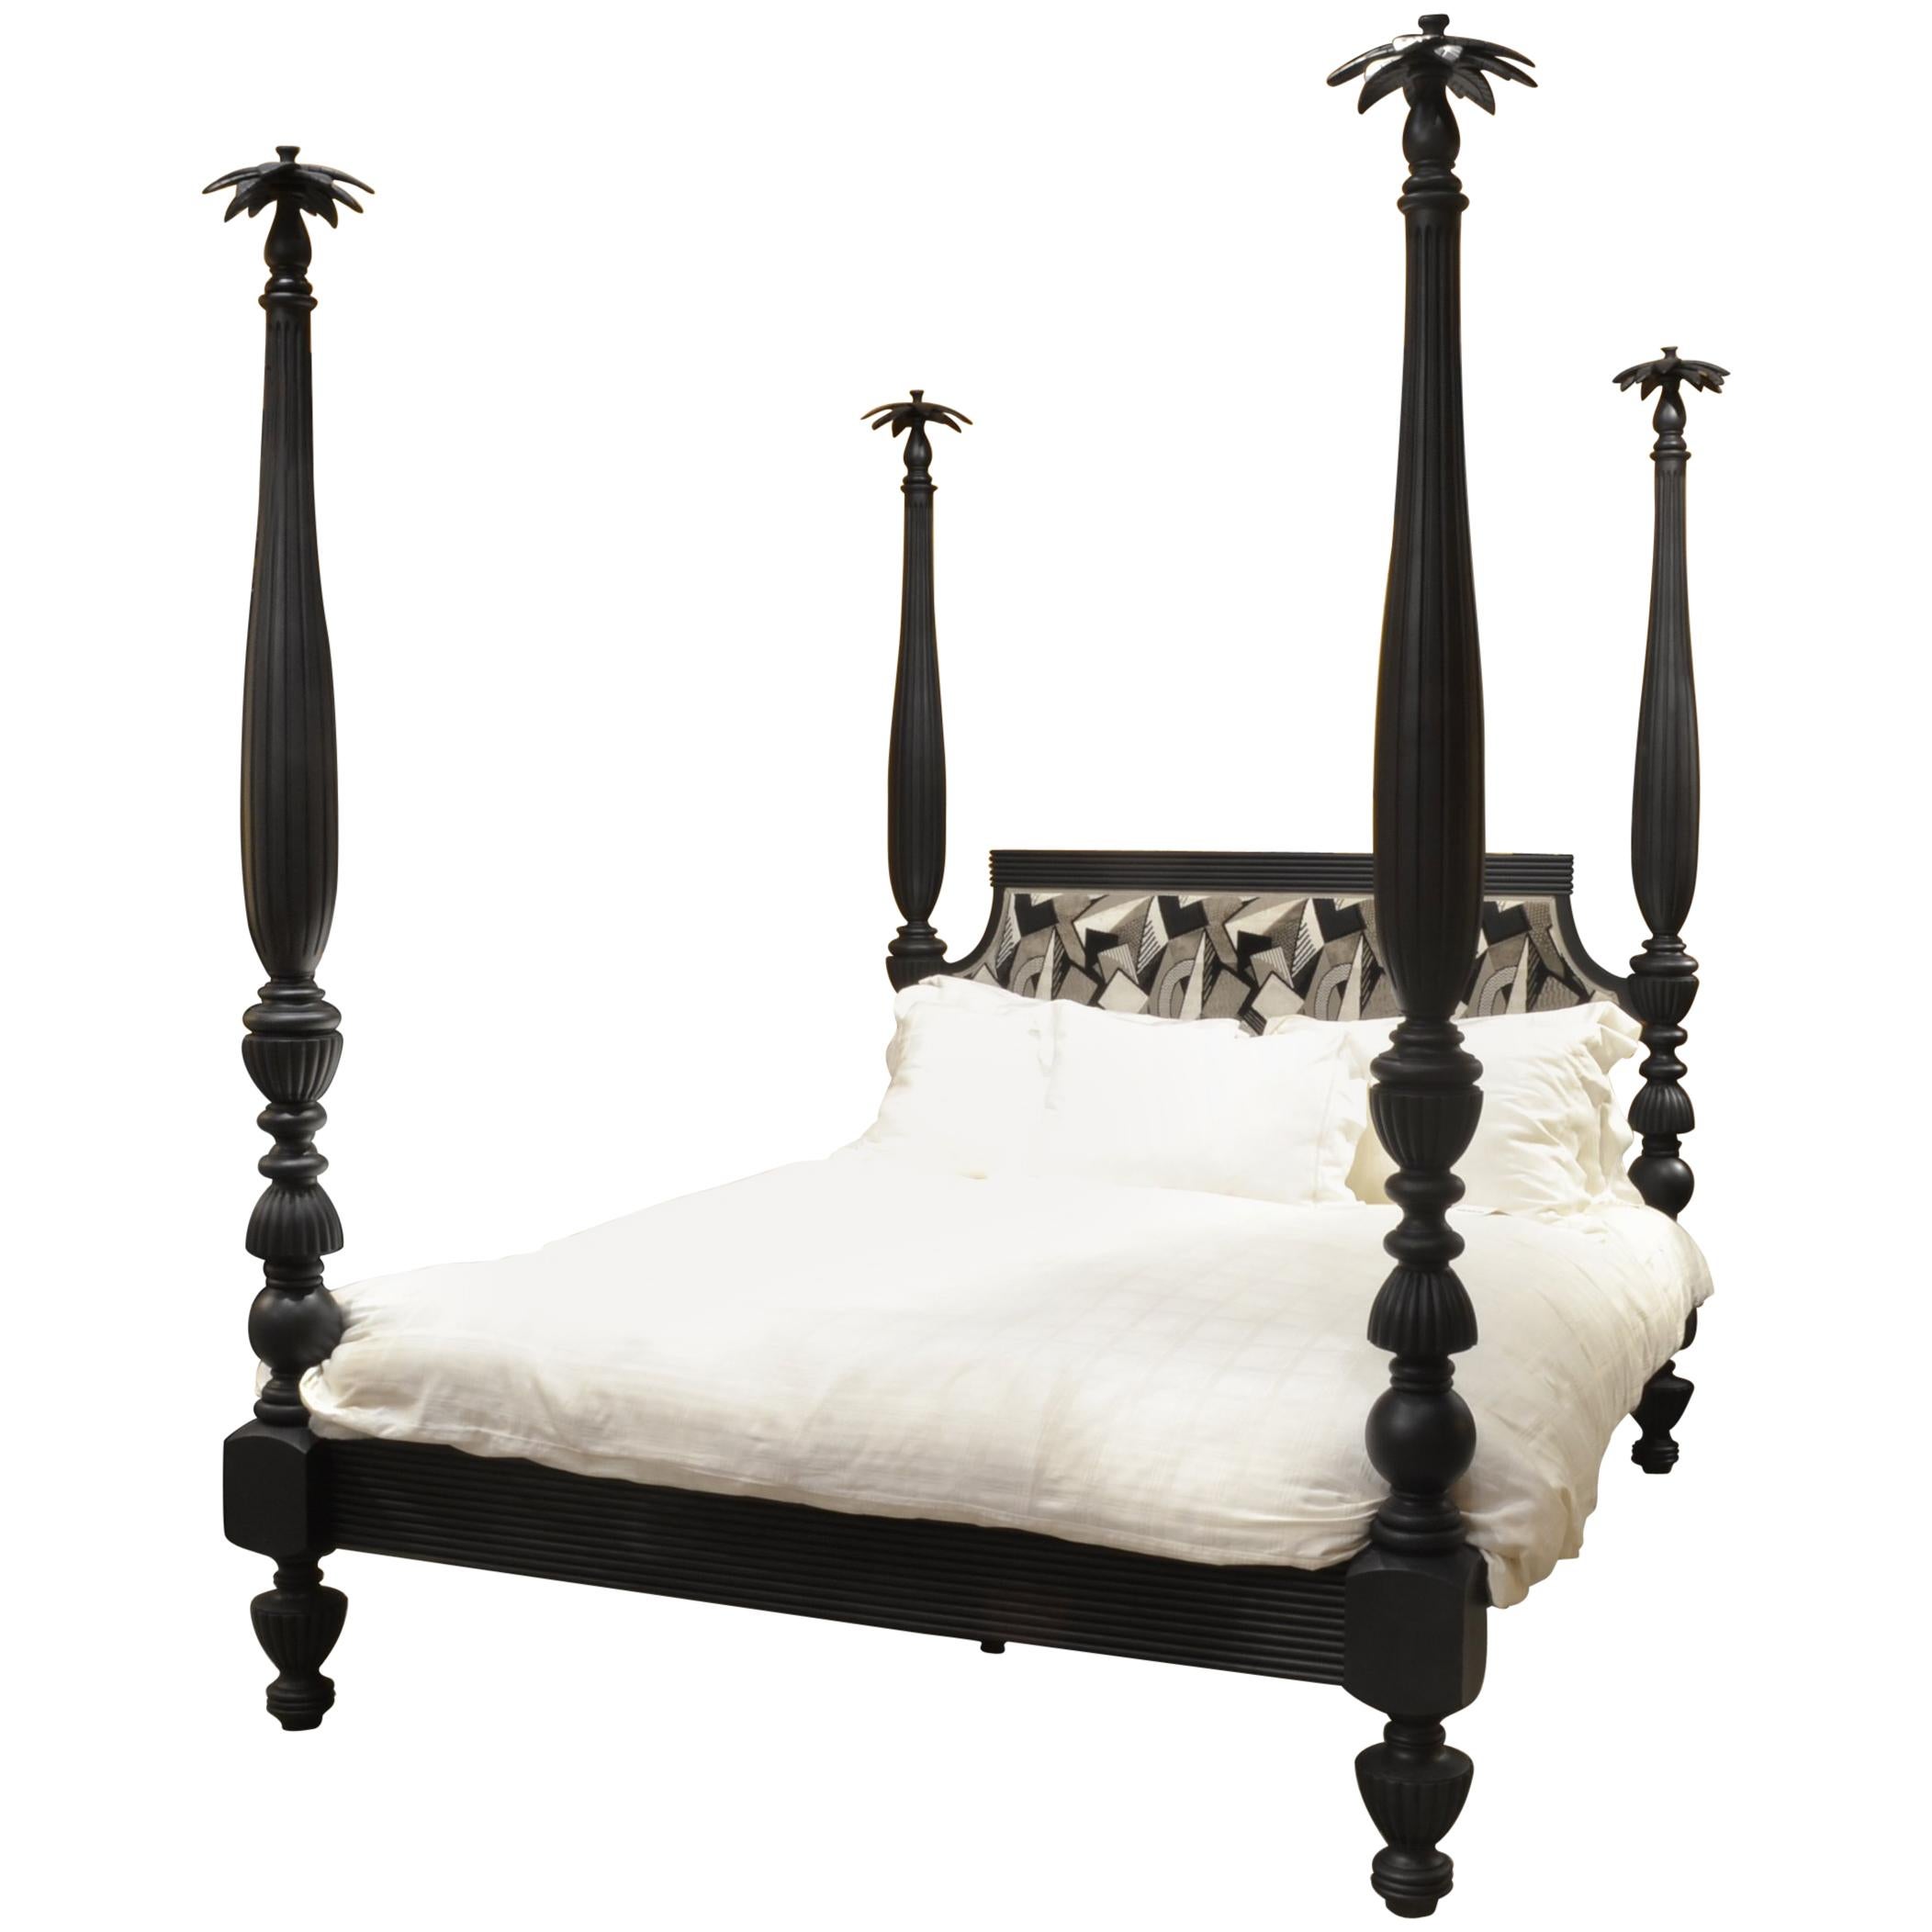 Cubist Upholstery Ebony Brighton Bedframe with Palm Tree Finials